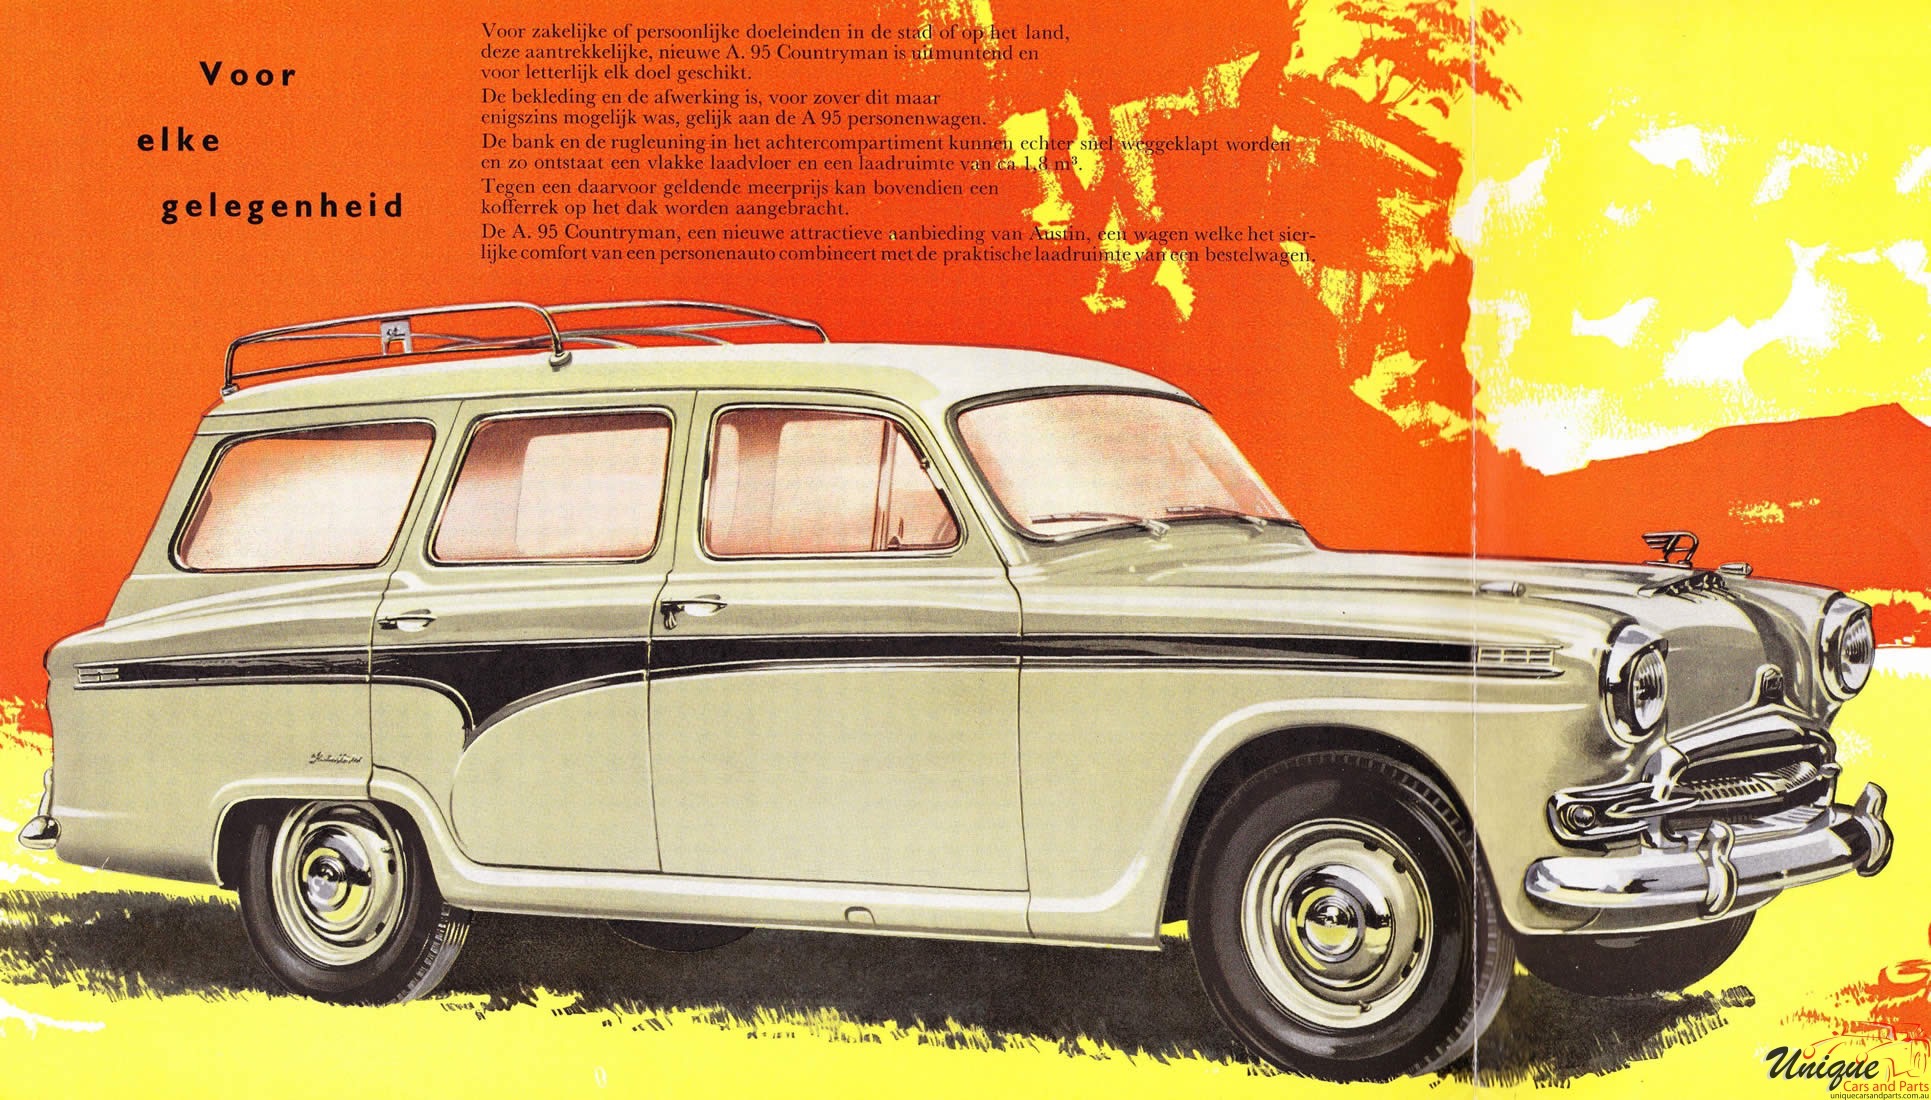 1956 Austin A95 Westminster Countryman (Netherlands) Brochure Page 5